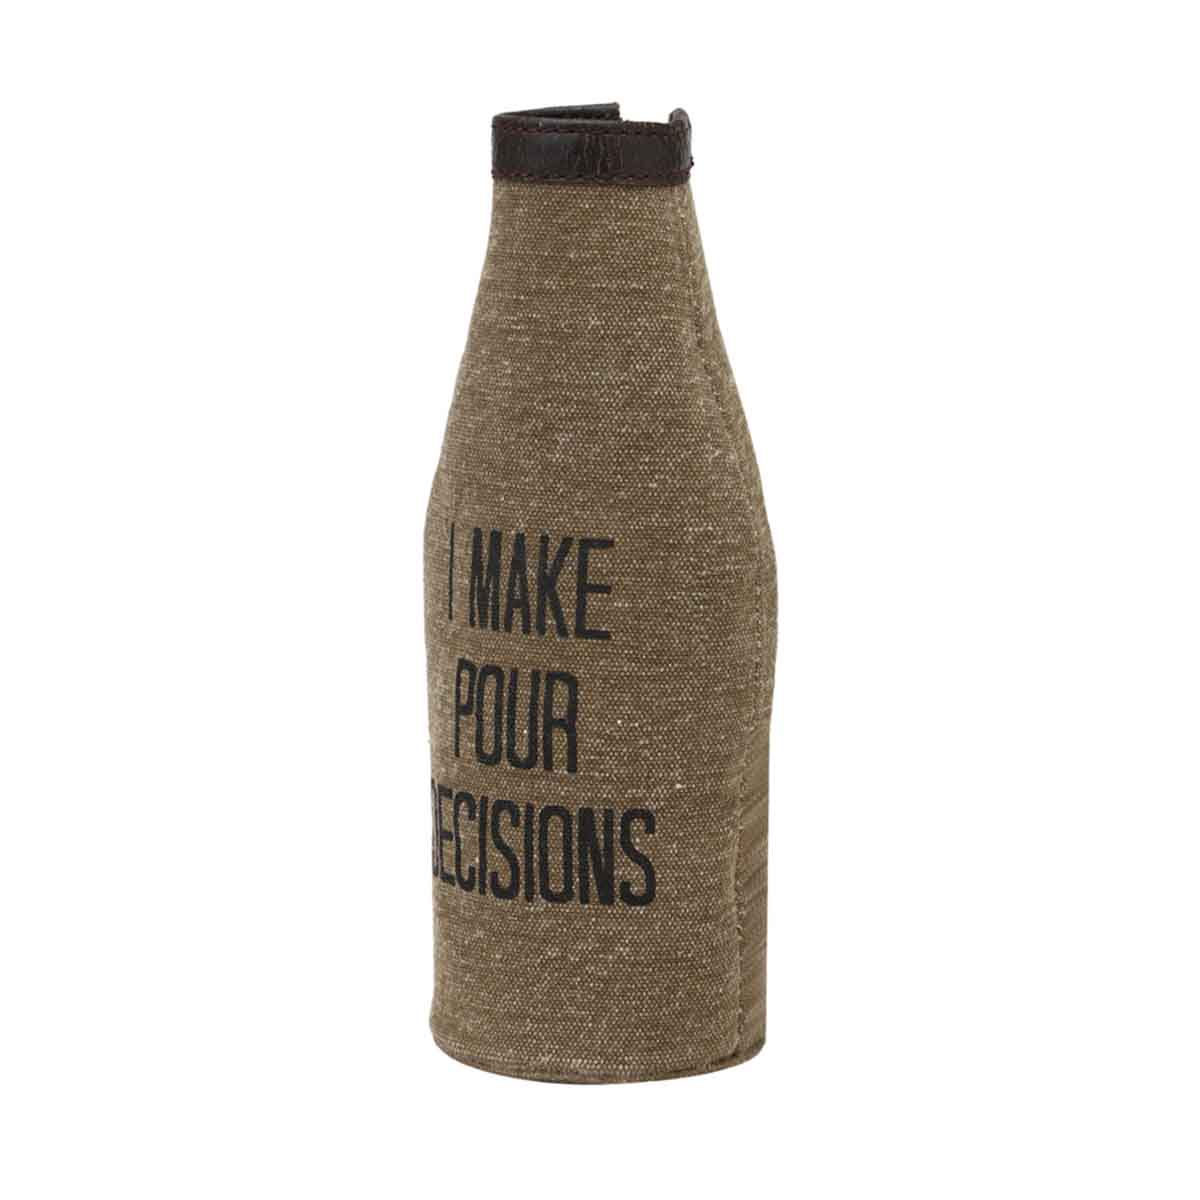 Mona B Pint Beer Bottle Covers with Stylish Printing for Men and Women (Pour Decisions)